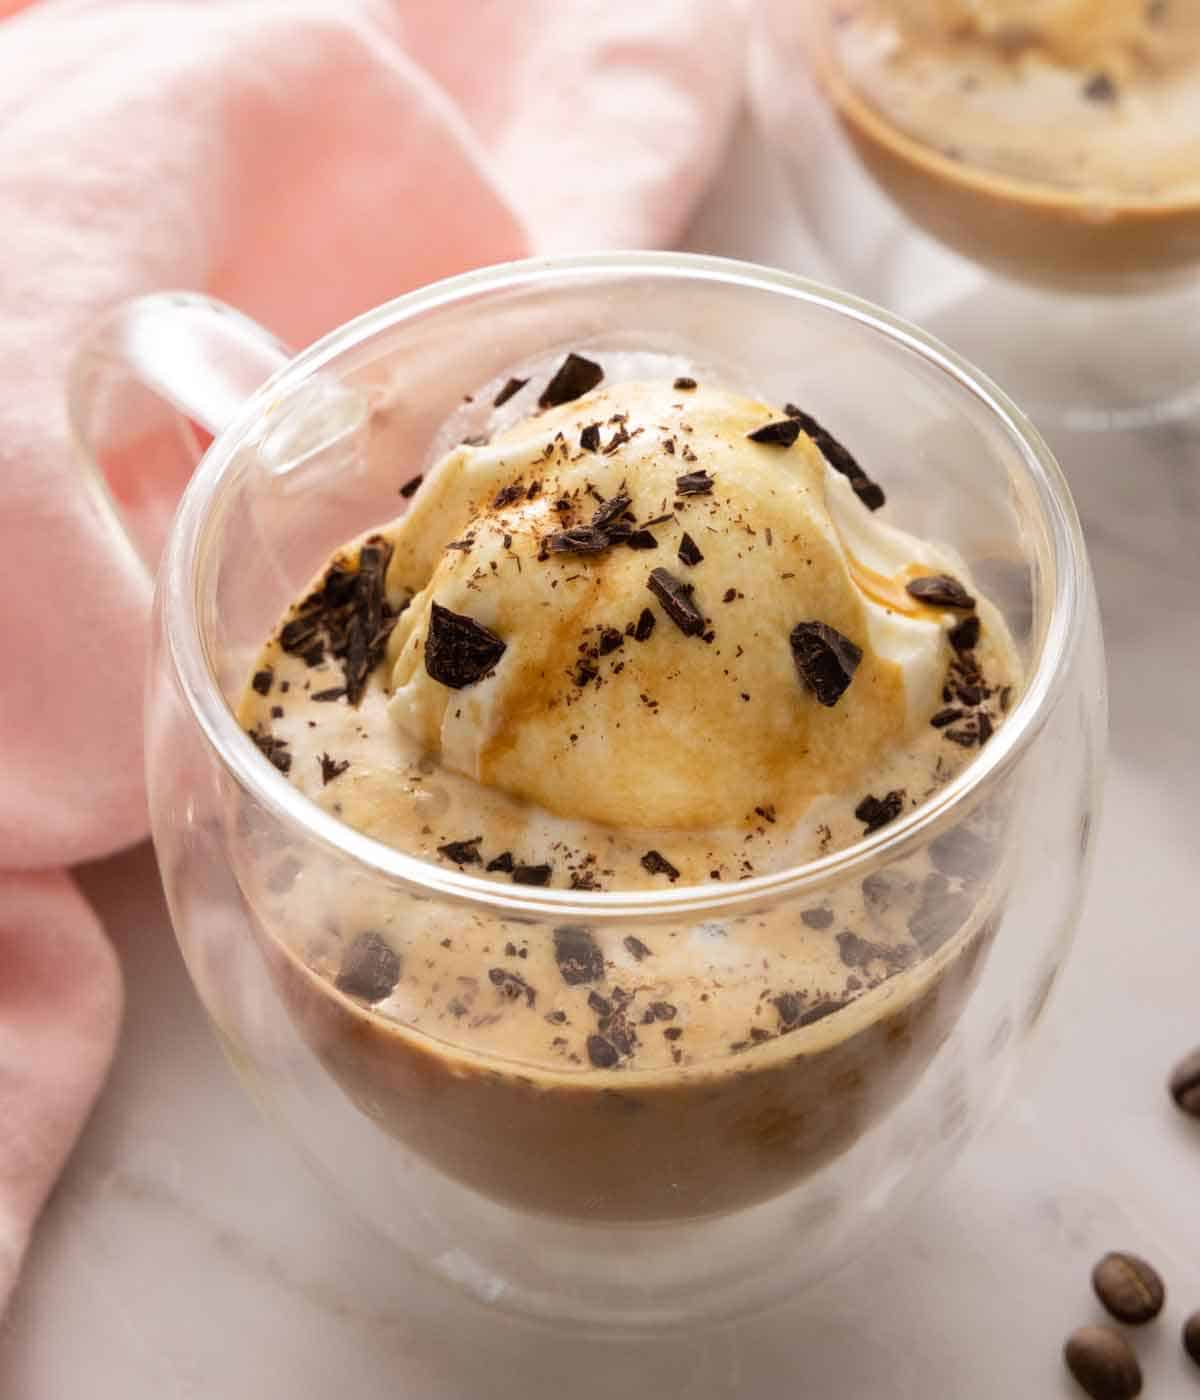 A cup of affogato with chocolate shavings on top.